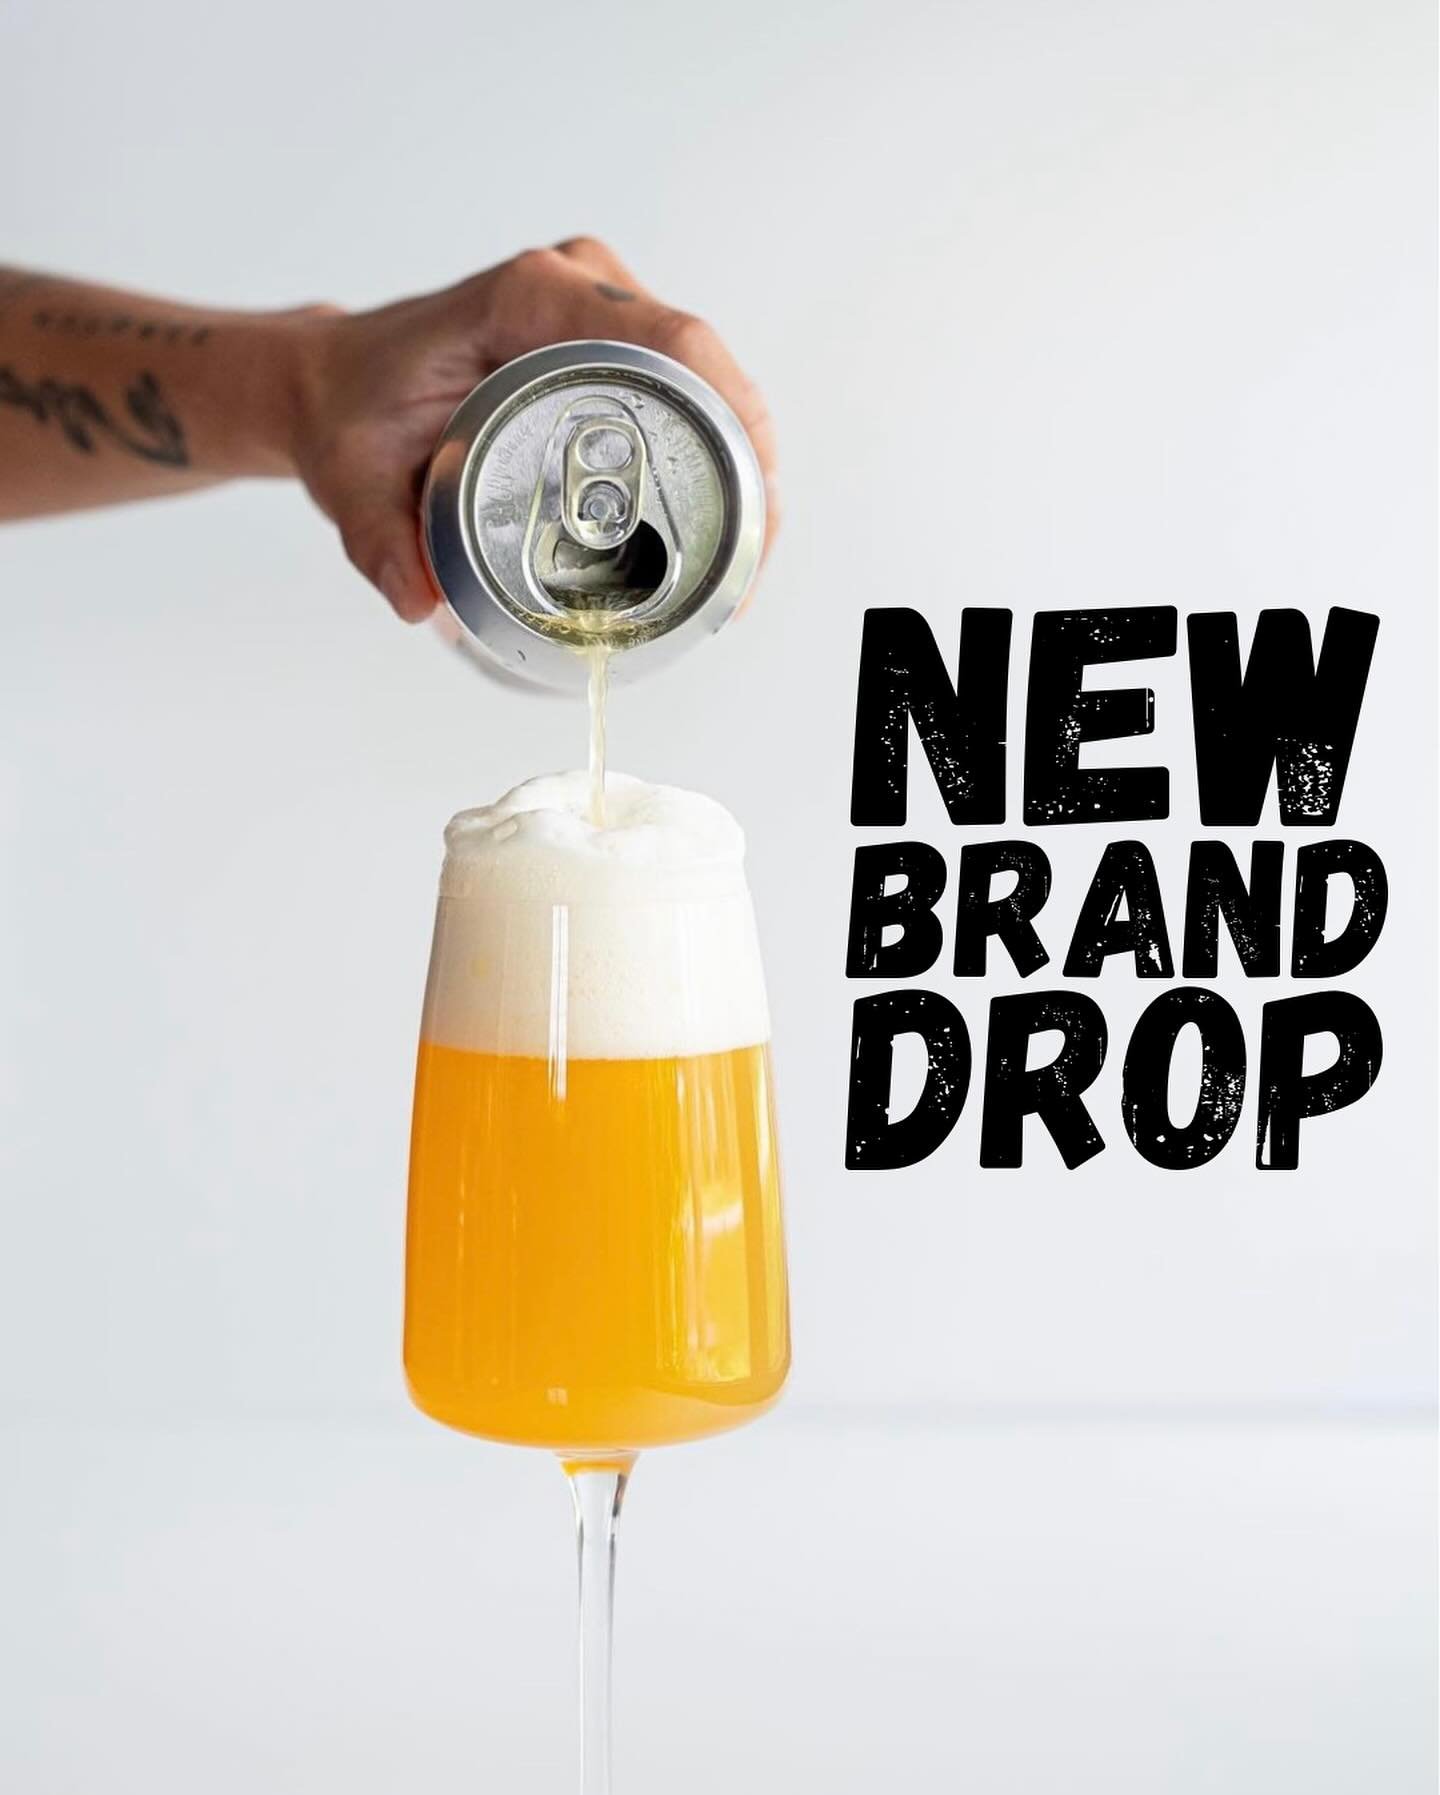 SUPER stoked on a brewery we&rsquo;ve got dropping next week. Here&rsquo;s a hint: it&rsquo;s the first time you&rsquo;ll see this brand in NY‼️👀 Any clue what&rsquo;s landing on the shelves? Drop your guesses in the comments!👇

_____
#onestopbrews